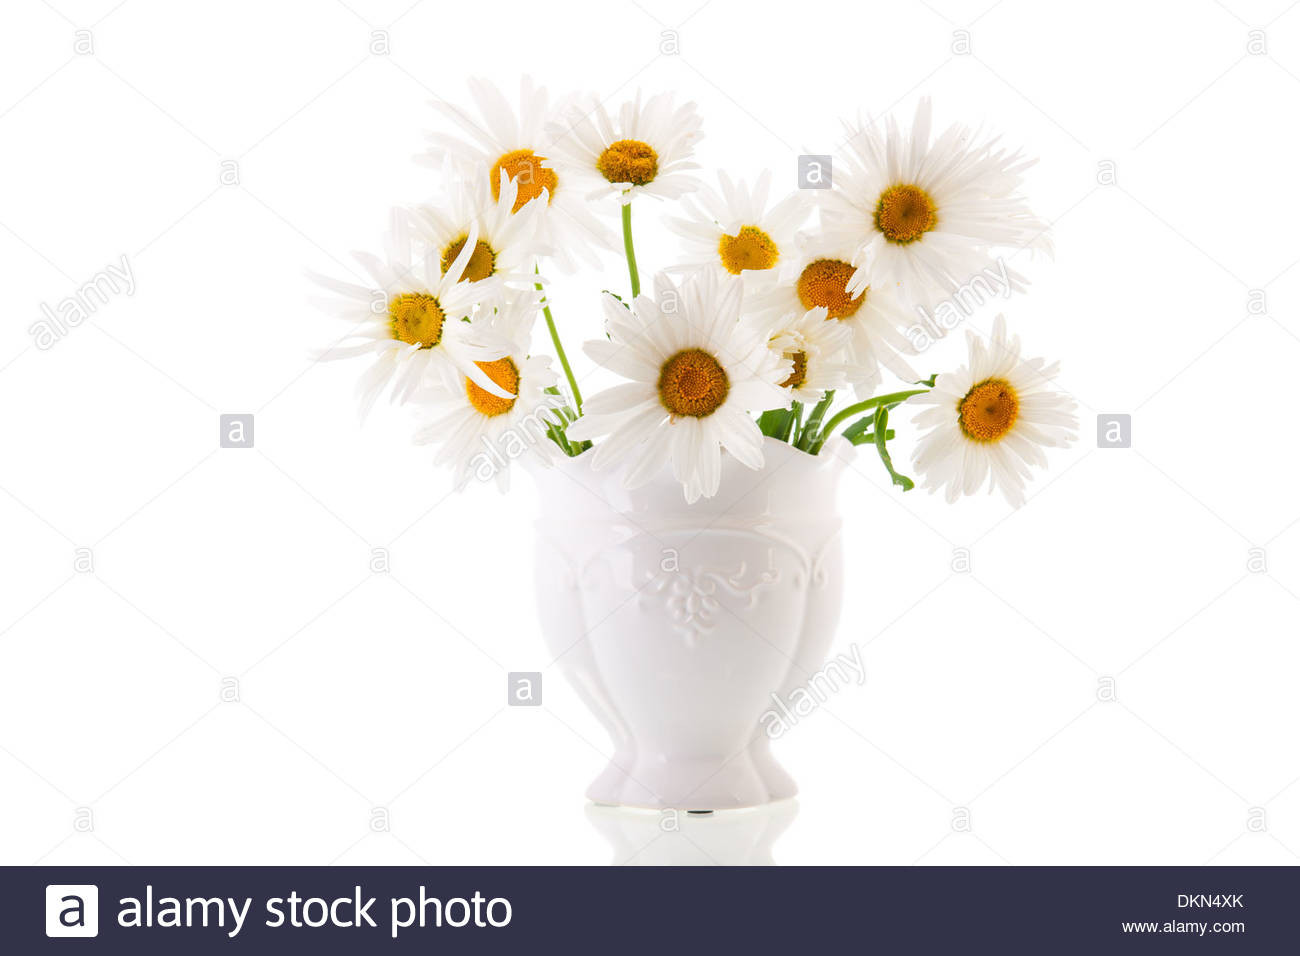 10 Nice White Pitcher Vase with Flowers 2023 free download white pitcher vase with flowers of white daisies isolated in vase stock photo 63774443 alamy inside white daisies isolated in vase